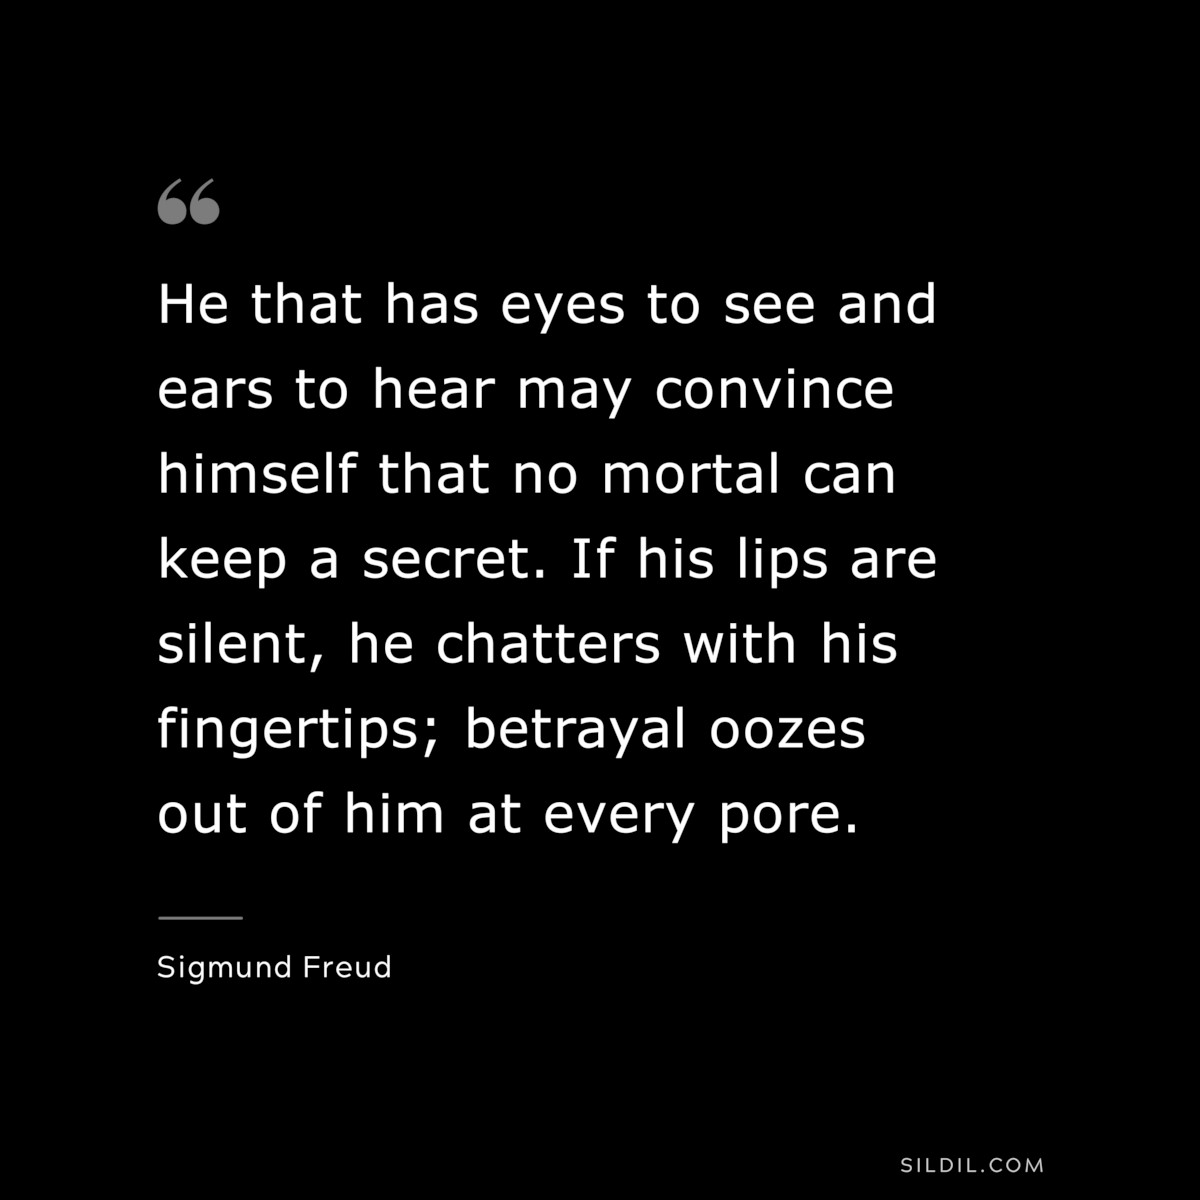 He that has eyes to see and ears to hear may convince himself that no mortal can keep a secret. If his lips are silent, he chatters with his fingertips; betrayal oozes out of him at every pore. ― Sigmund Frued